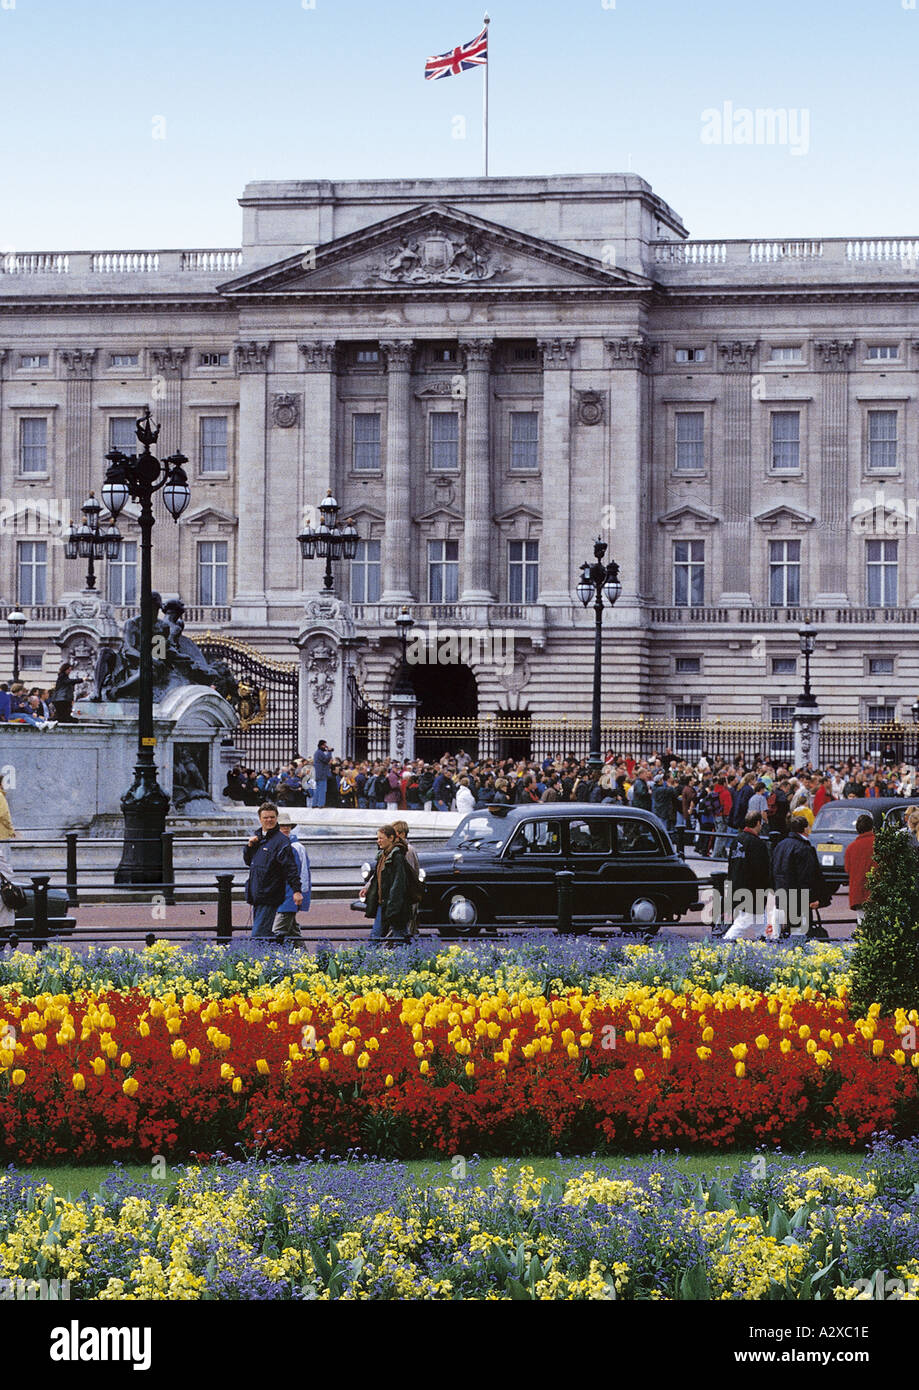 Front Elevation of Buckingham Palace Royal Residence of Her Majesty Queen Elizabeth II London Stock Photo